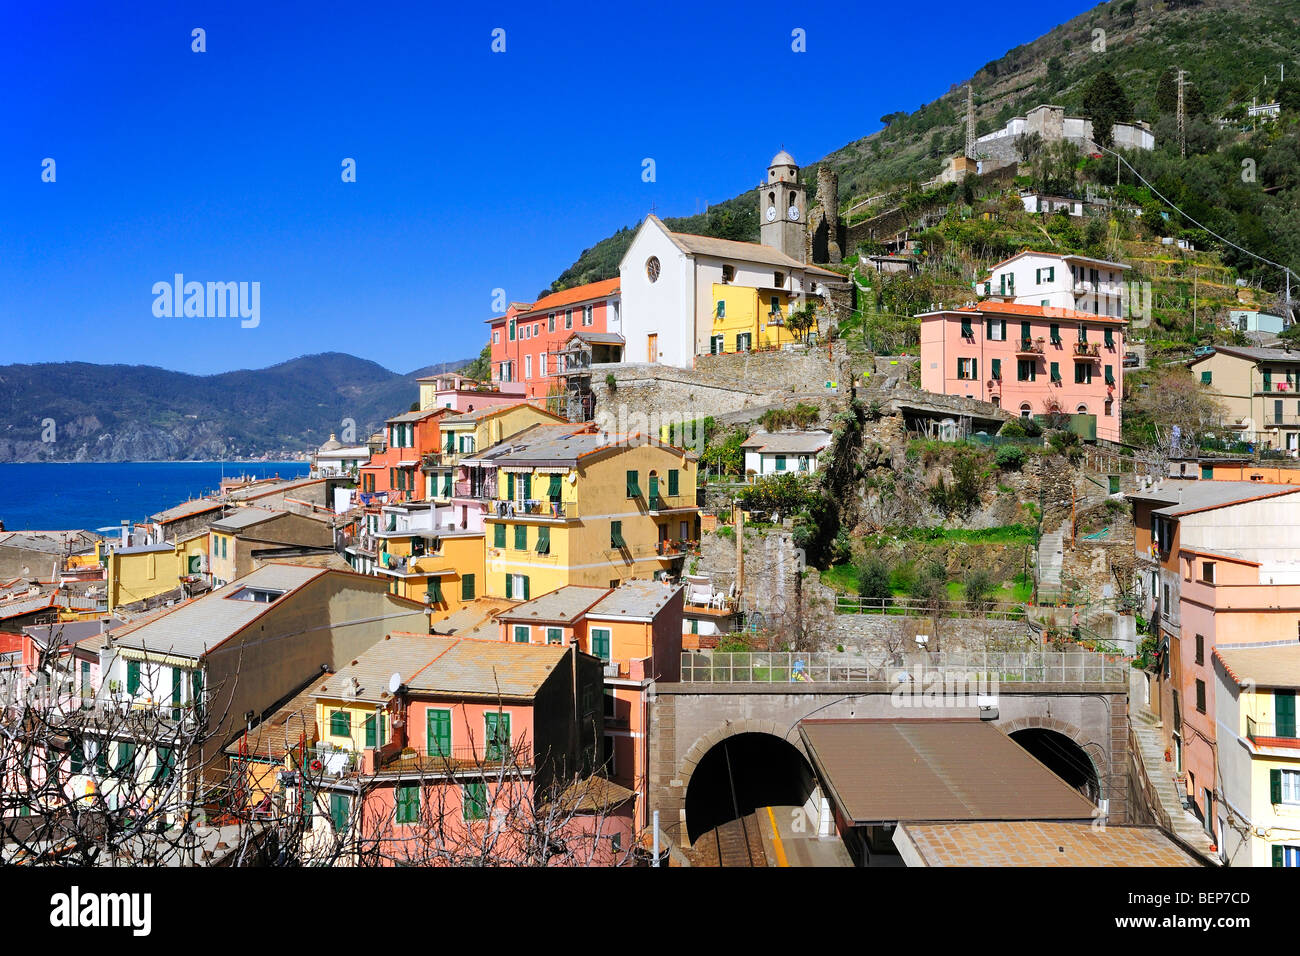 The train station with the tunnel in the village of Vernazza, Cinque Terre, Liguria, Italy. Stock Photo